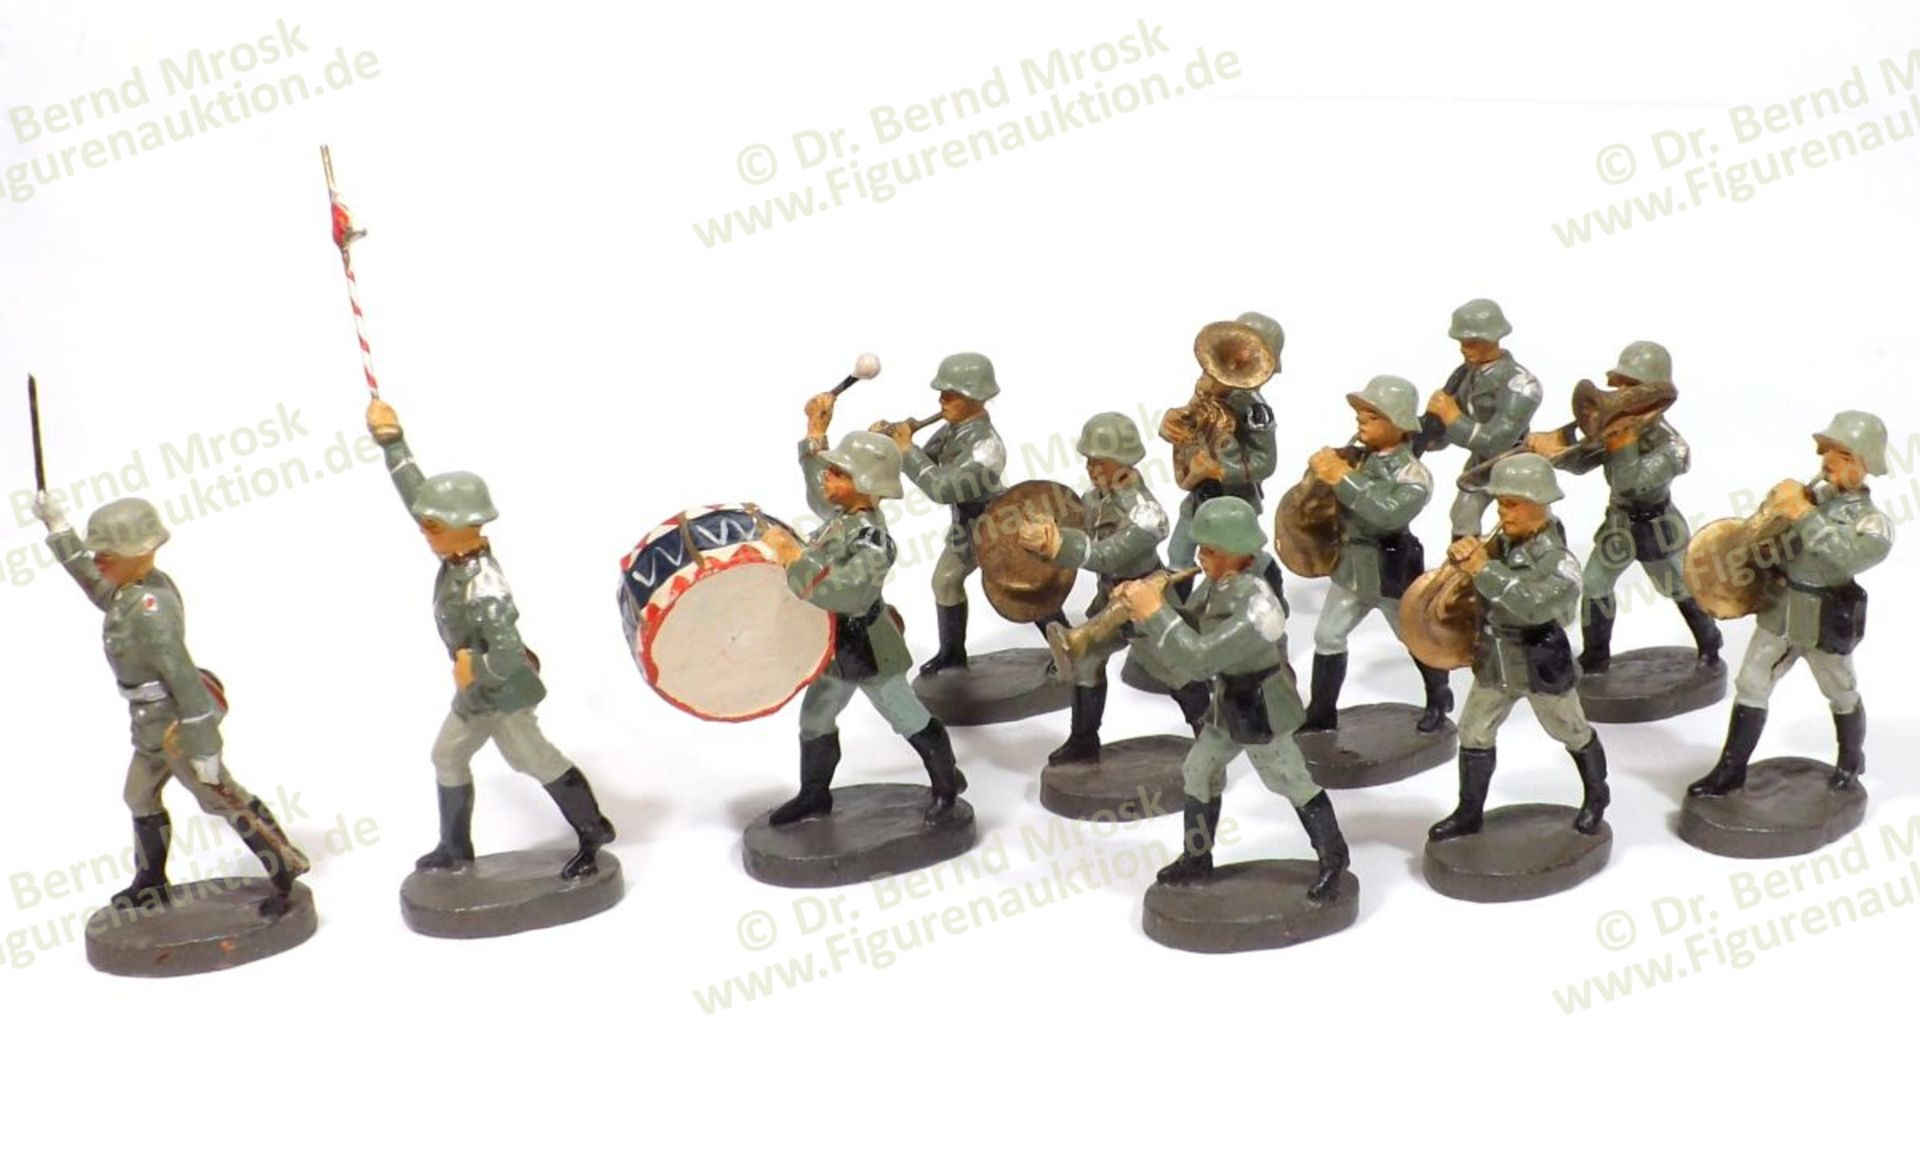 German military, Elastolin, composition figures, 7-7,5 cm size, made in Germany about 1938